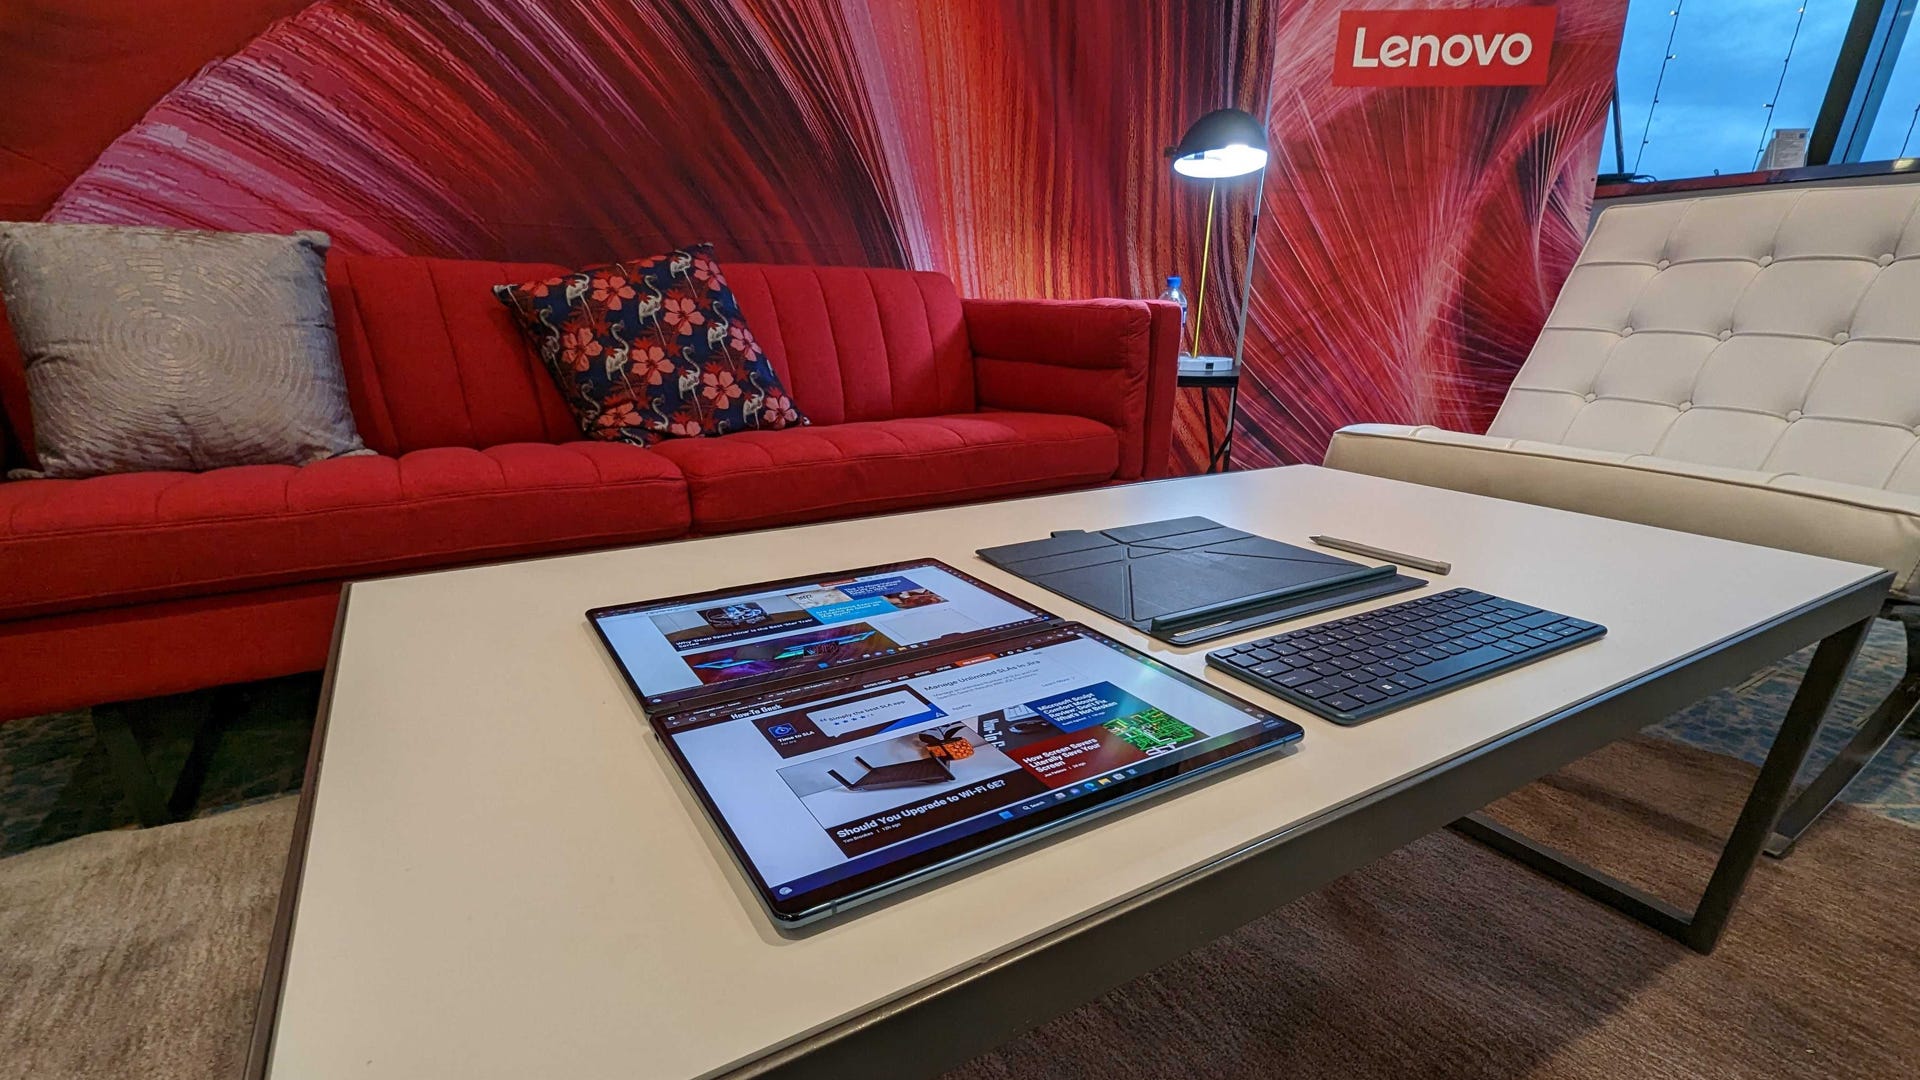 Lenovo Yoga Book 9i laying flat on a table with accessories